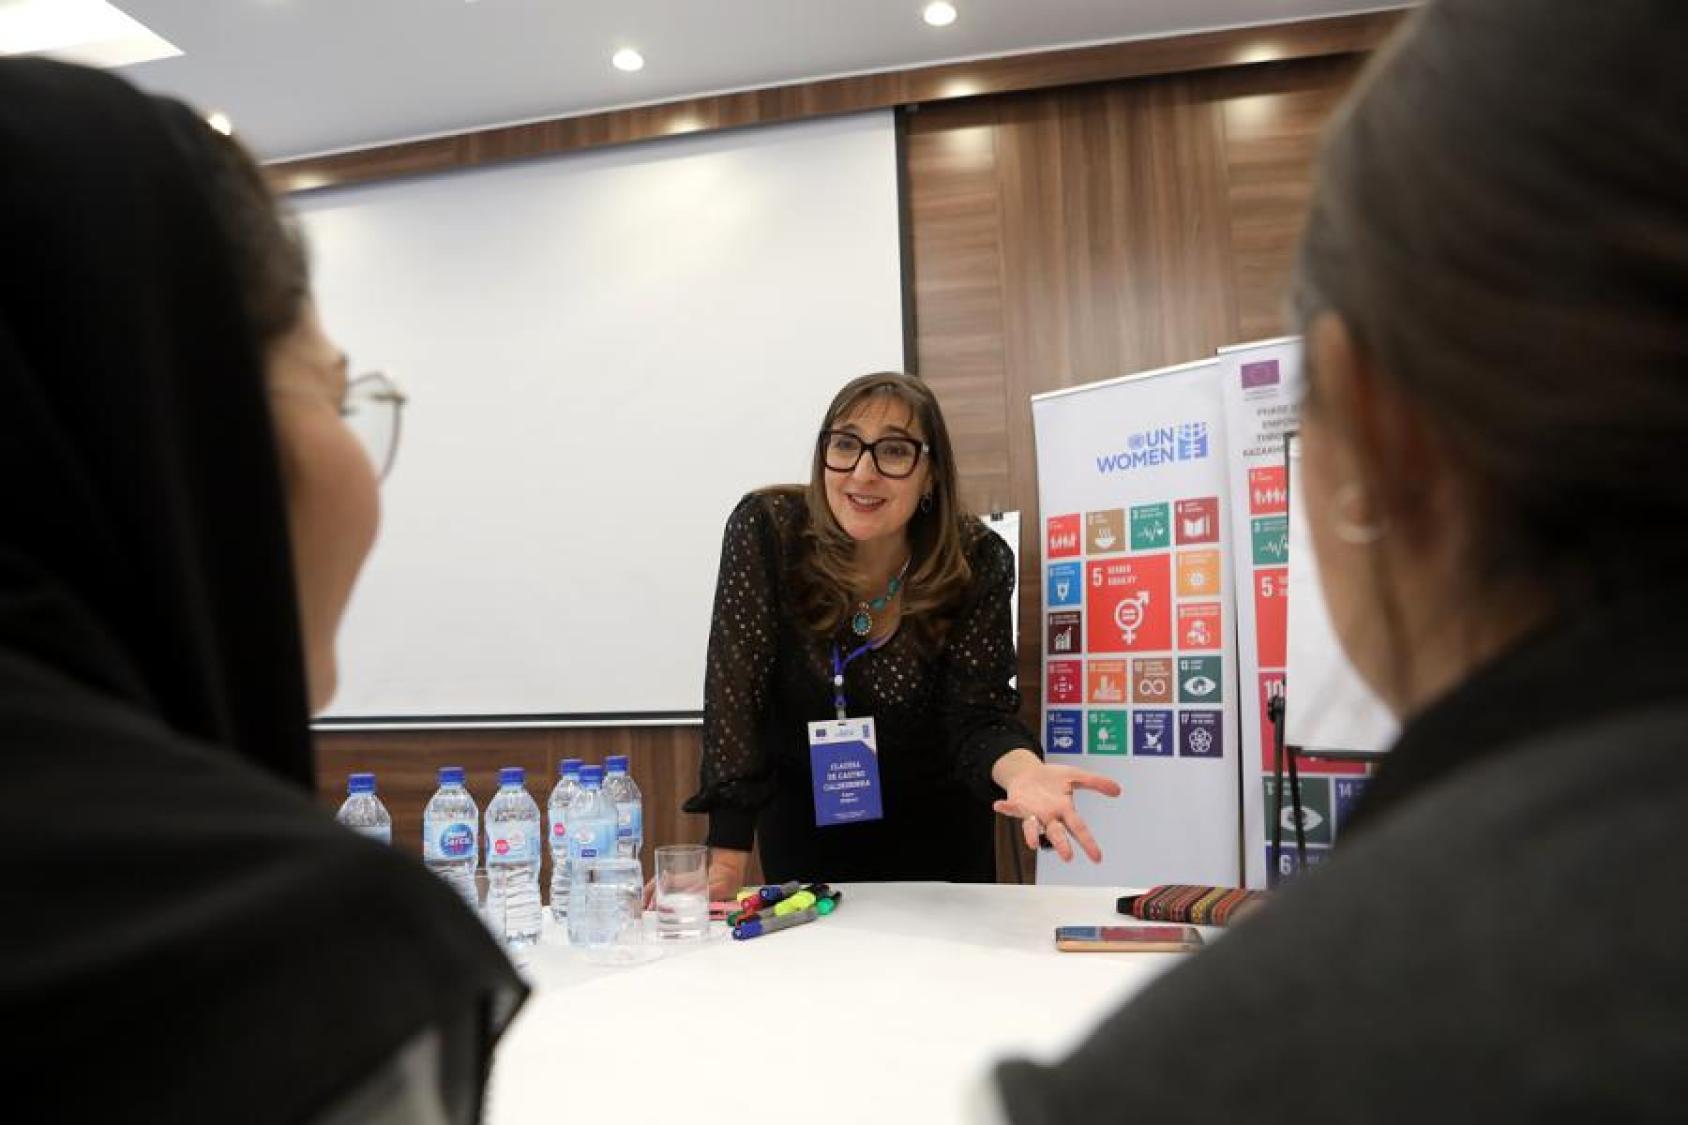 A female trainer discusses something with participants with the SDGs behind her.